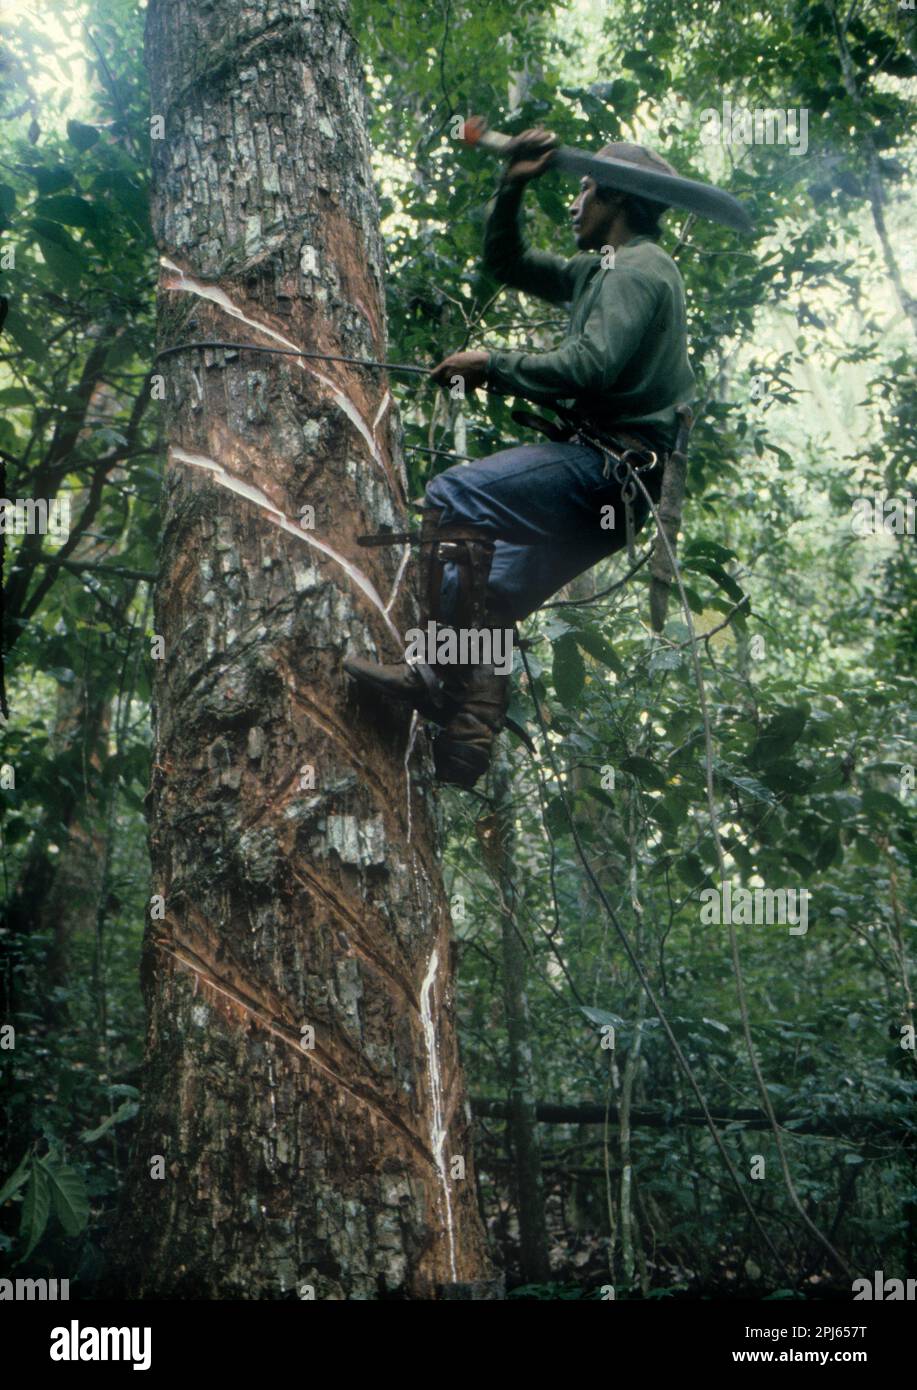 Man collecting balata latex (Manilkara bidentata, family Sapotaceae) in Amazon rainforest. It has been used for golf-ball covers and machie belts Stock Photo